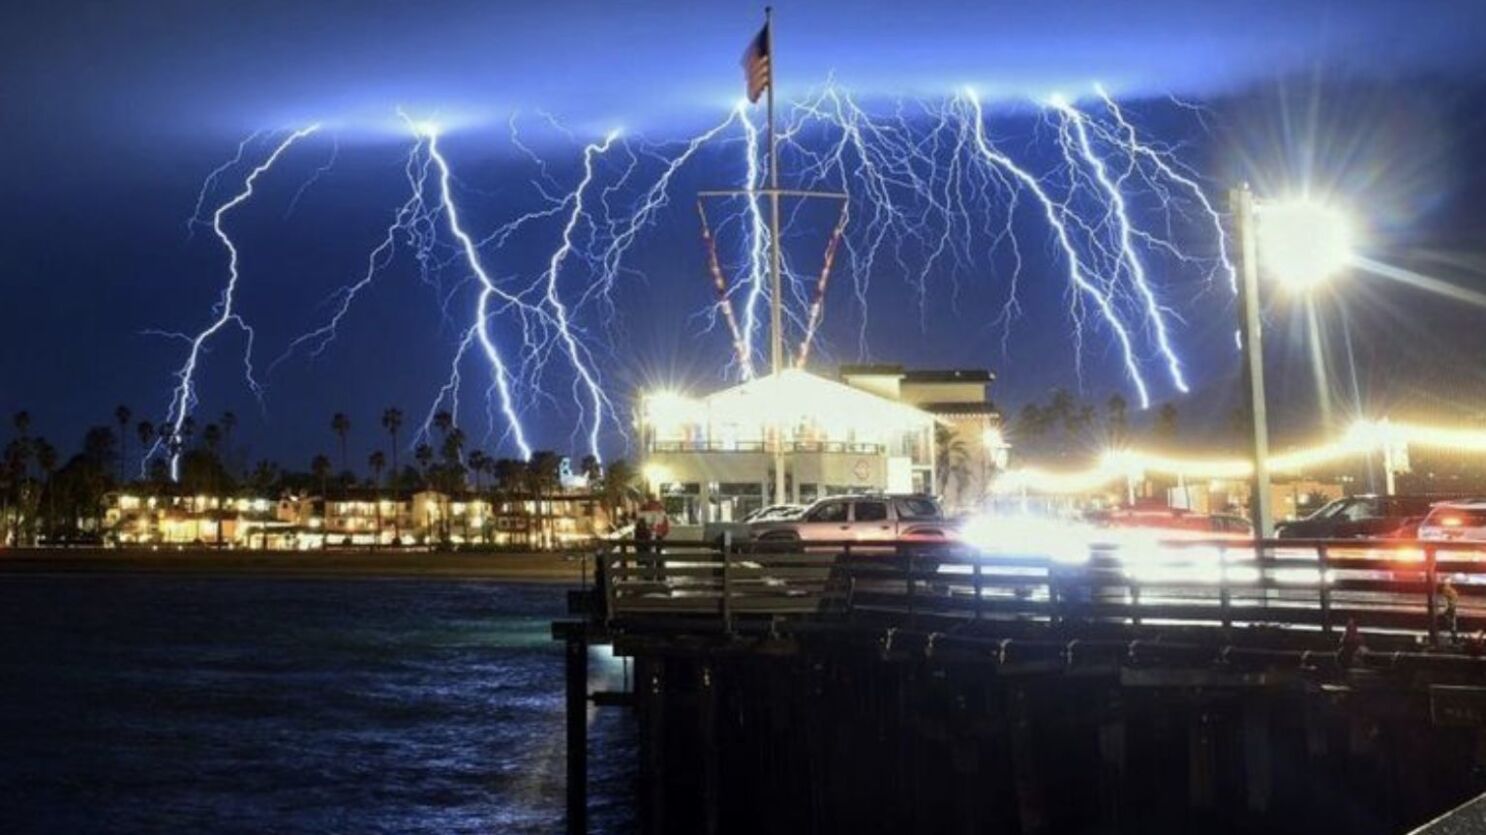 When lightning strikes, here are the biggest dangers - Los Angeles Times